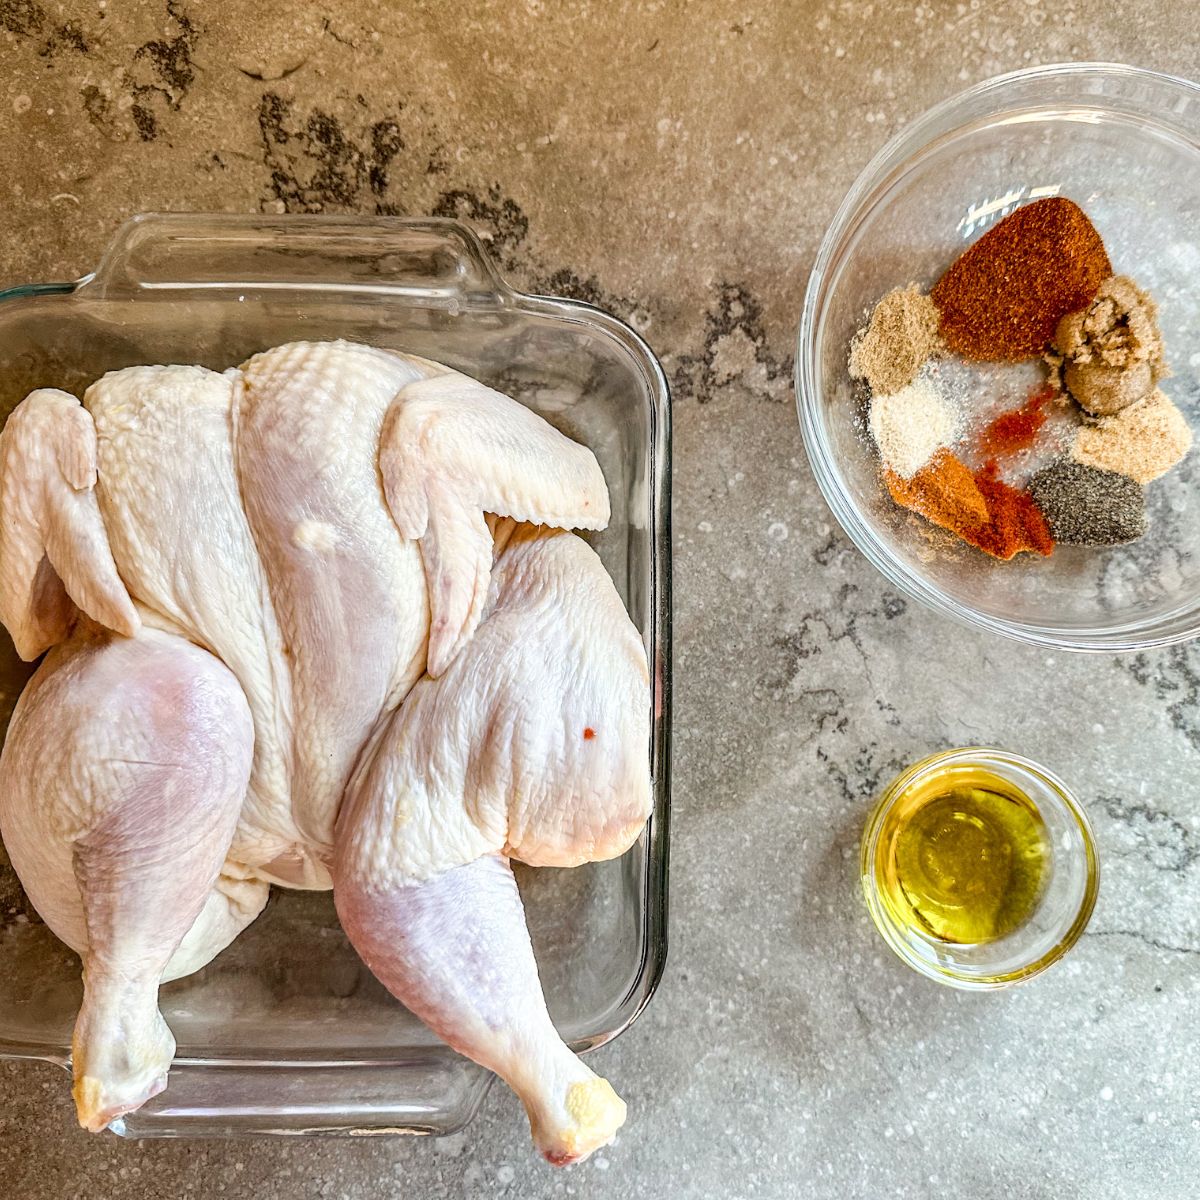 Sous Vide Whole Chicken Ingredients.